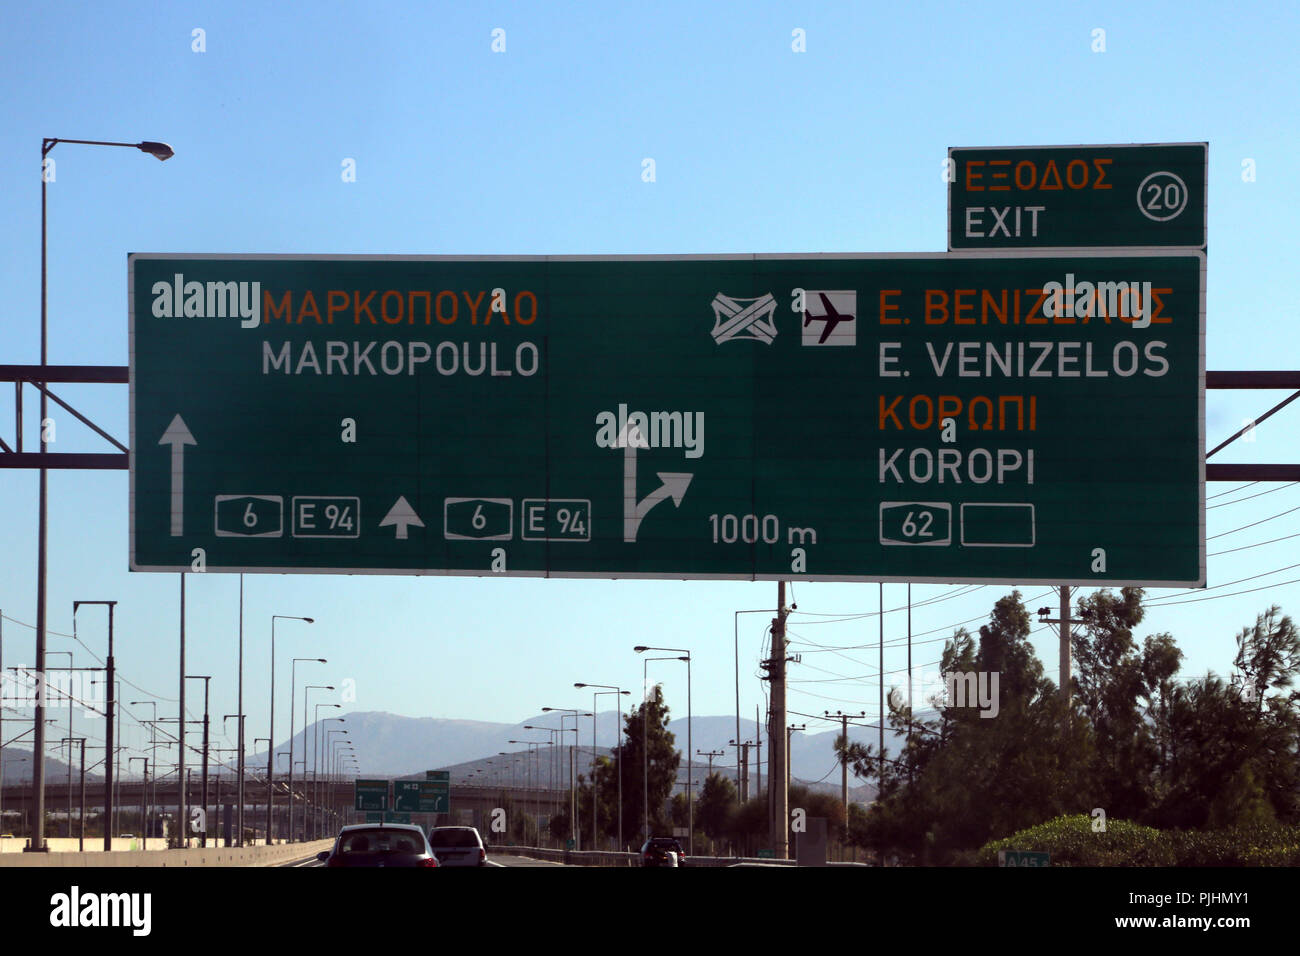 Athens Greece Bilingual Road Sign On Motorway Stock Photo